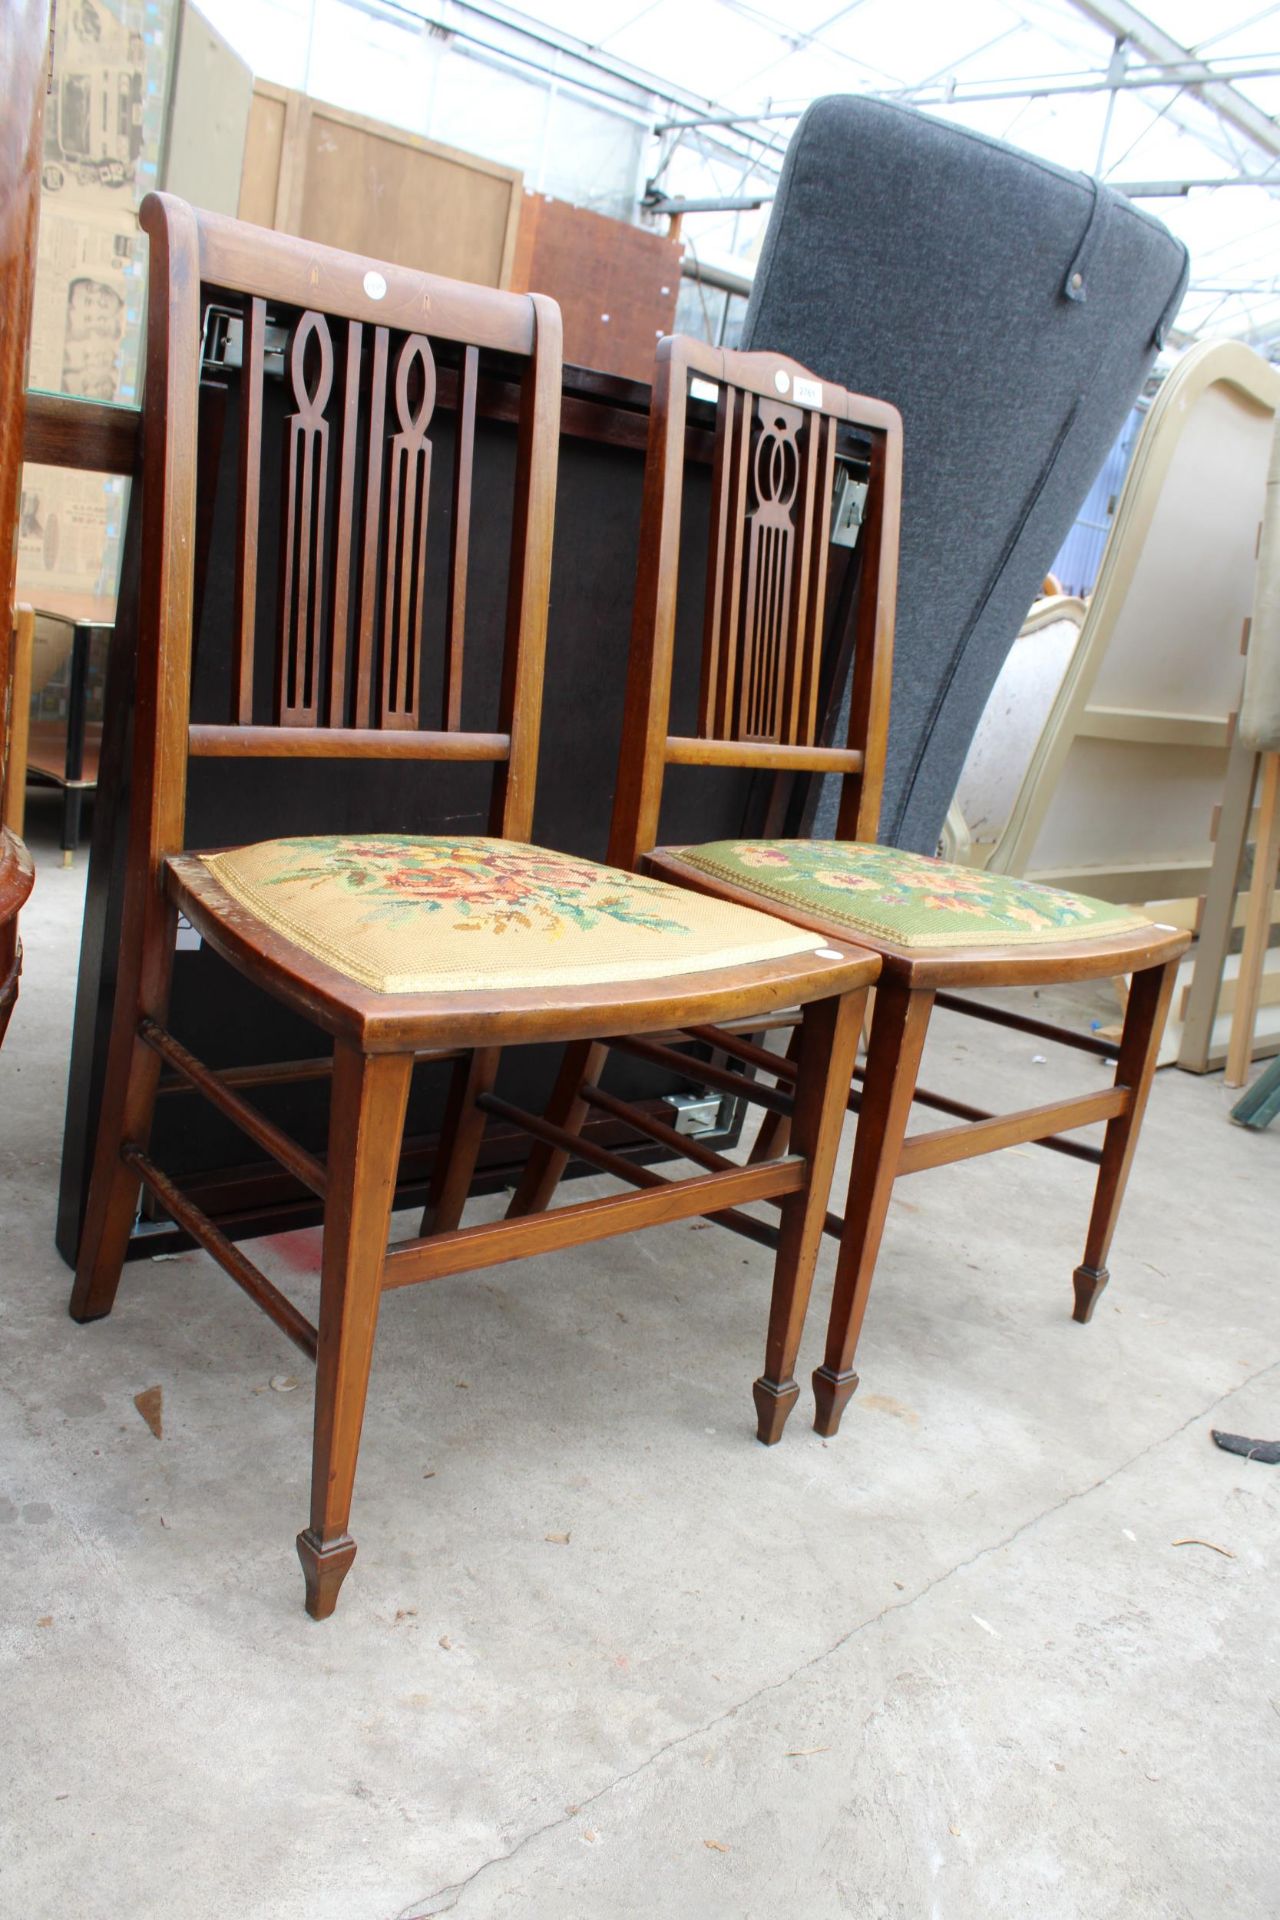 A PAIR OF EDWARDIAN MAHOGANY AND INLAID BEDROOM CHAIRS WITH WOOLWORK SEATS - Image 4 of 4